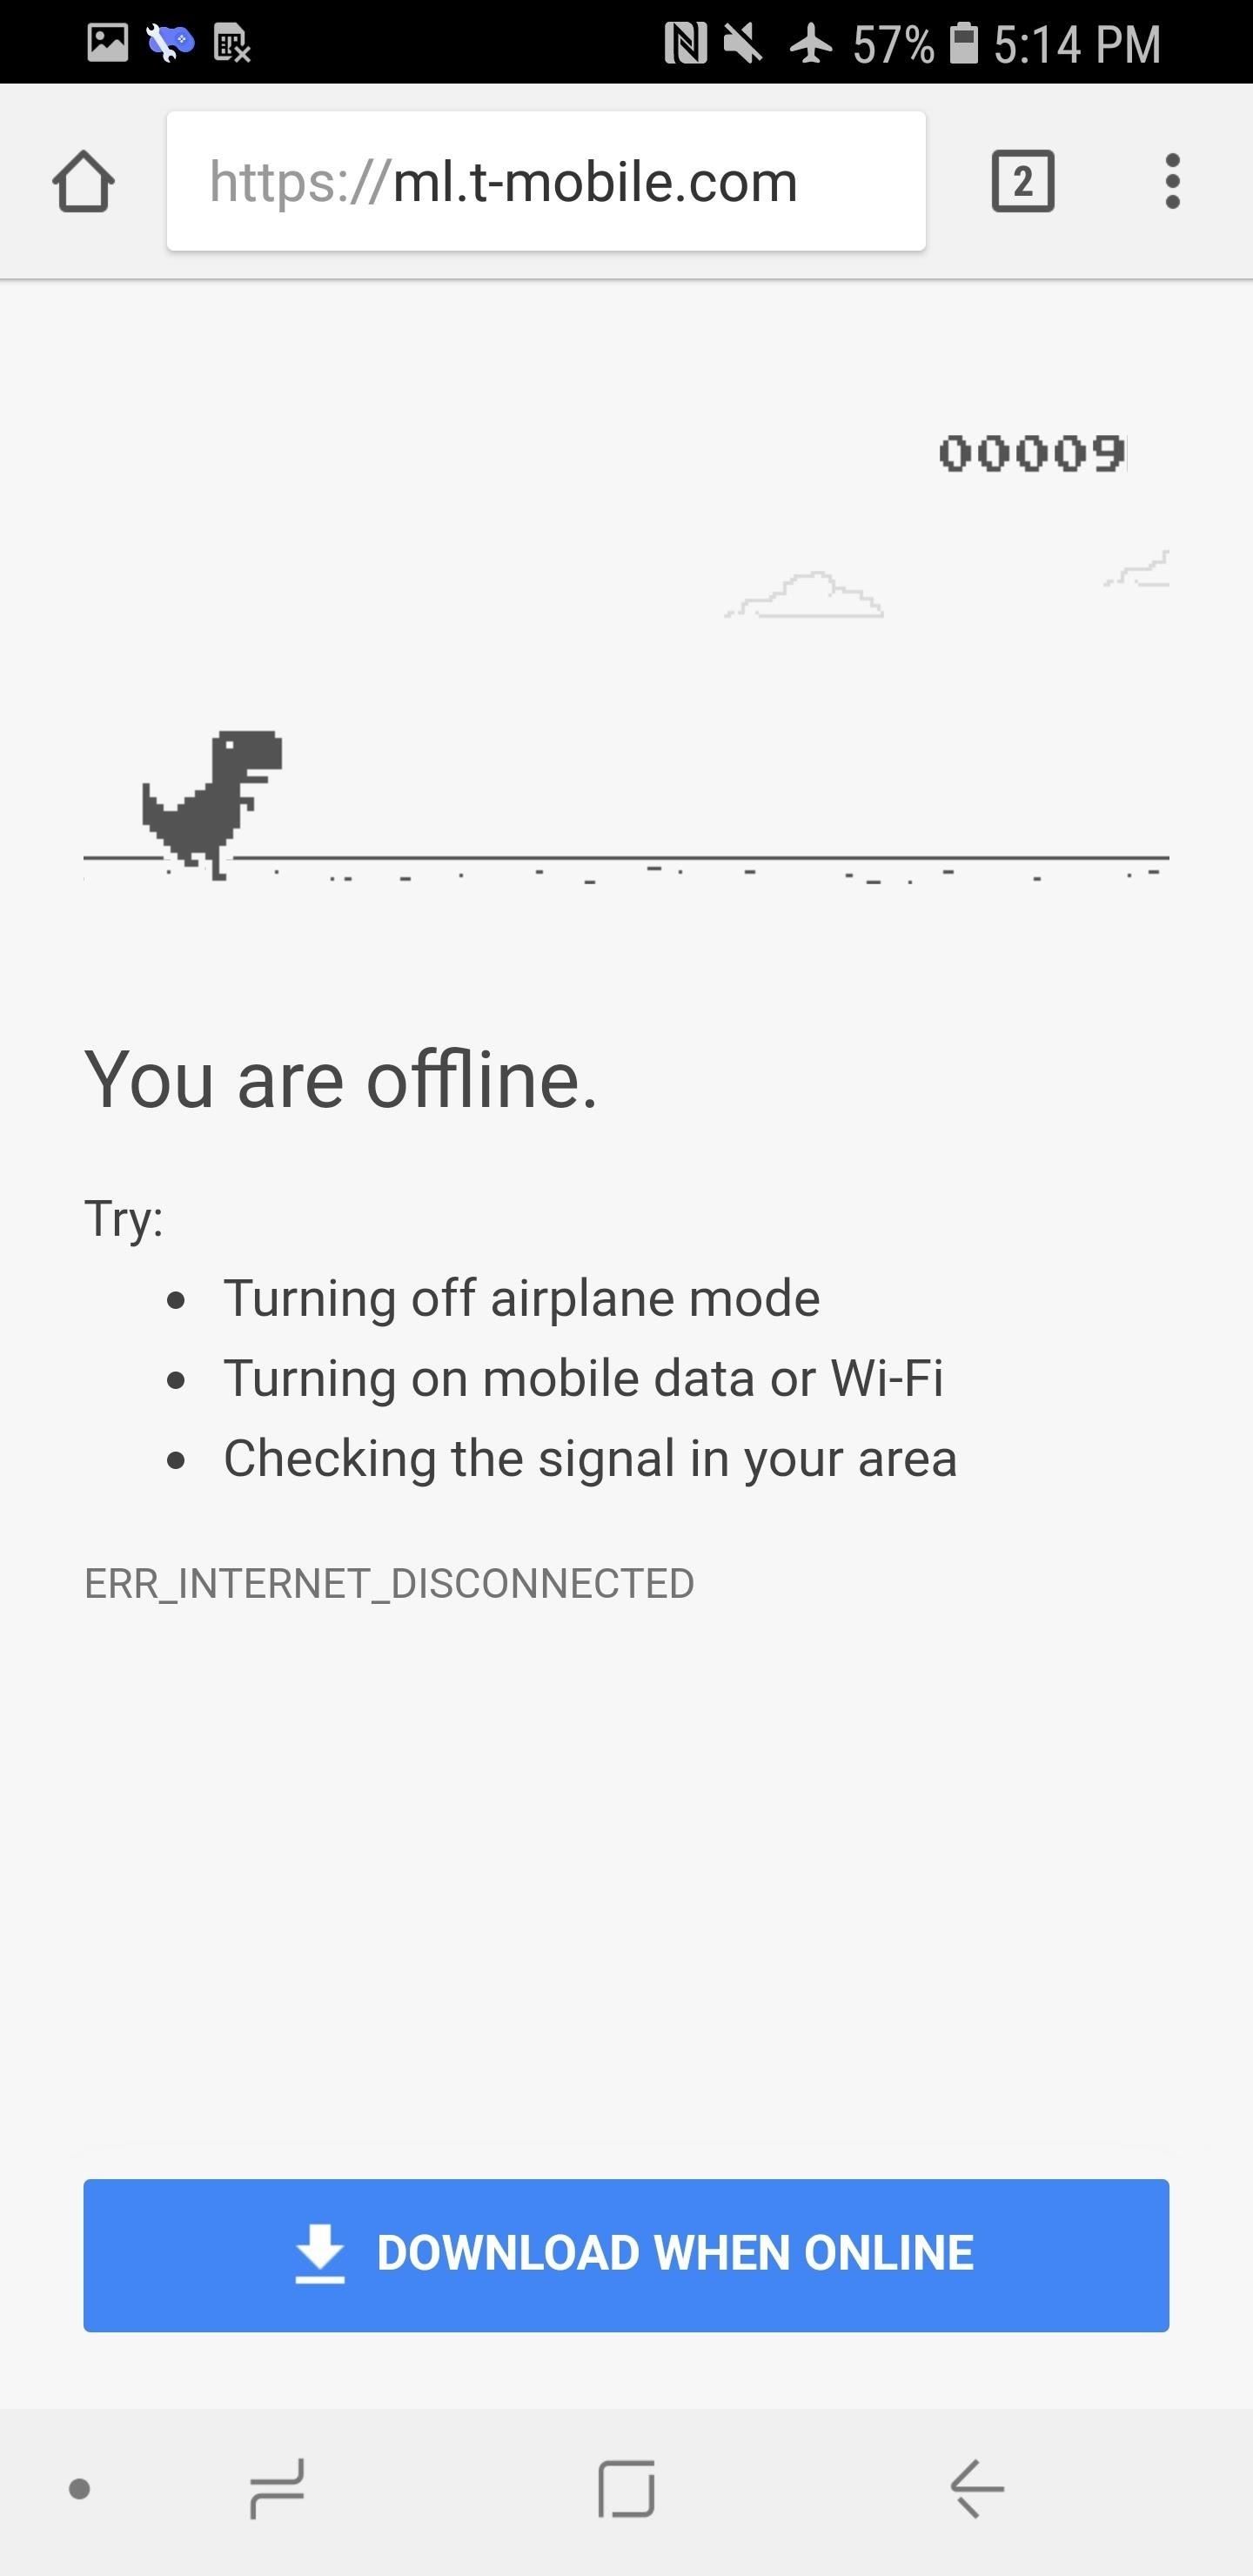 Google Chrome 101: How to Play the Hidden Dinosaur Mini-Game on Your iPhone or Android Phone